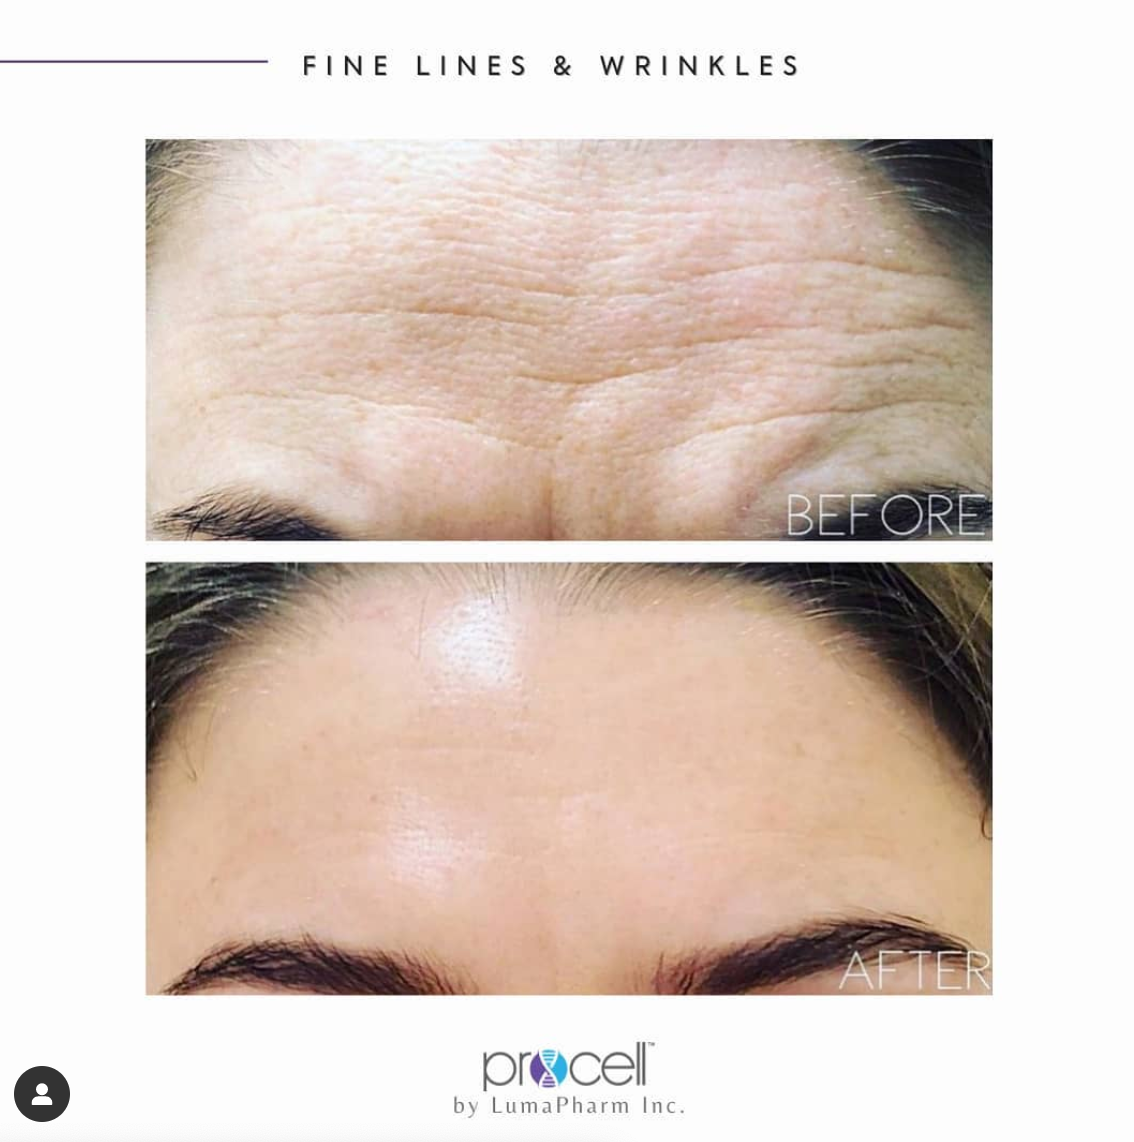 A before and after picture of a woman 's forehead with fine lines and wrinkles.